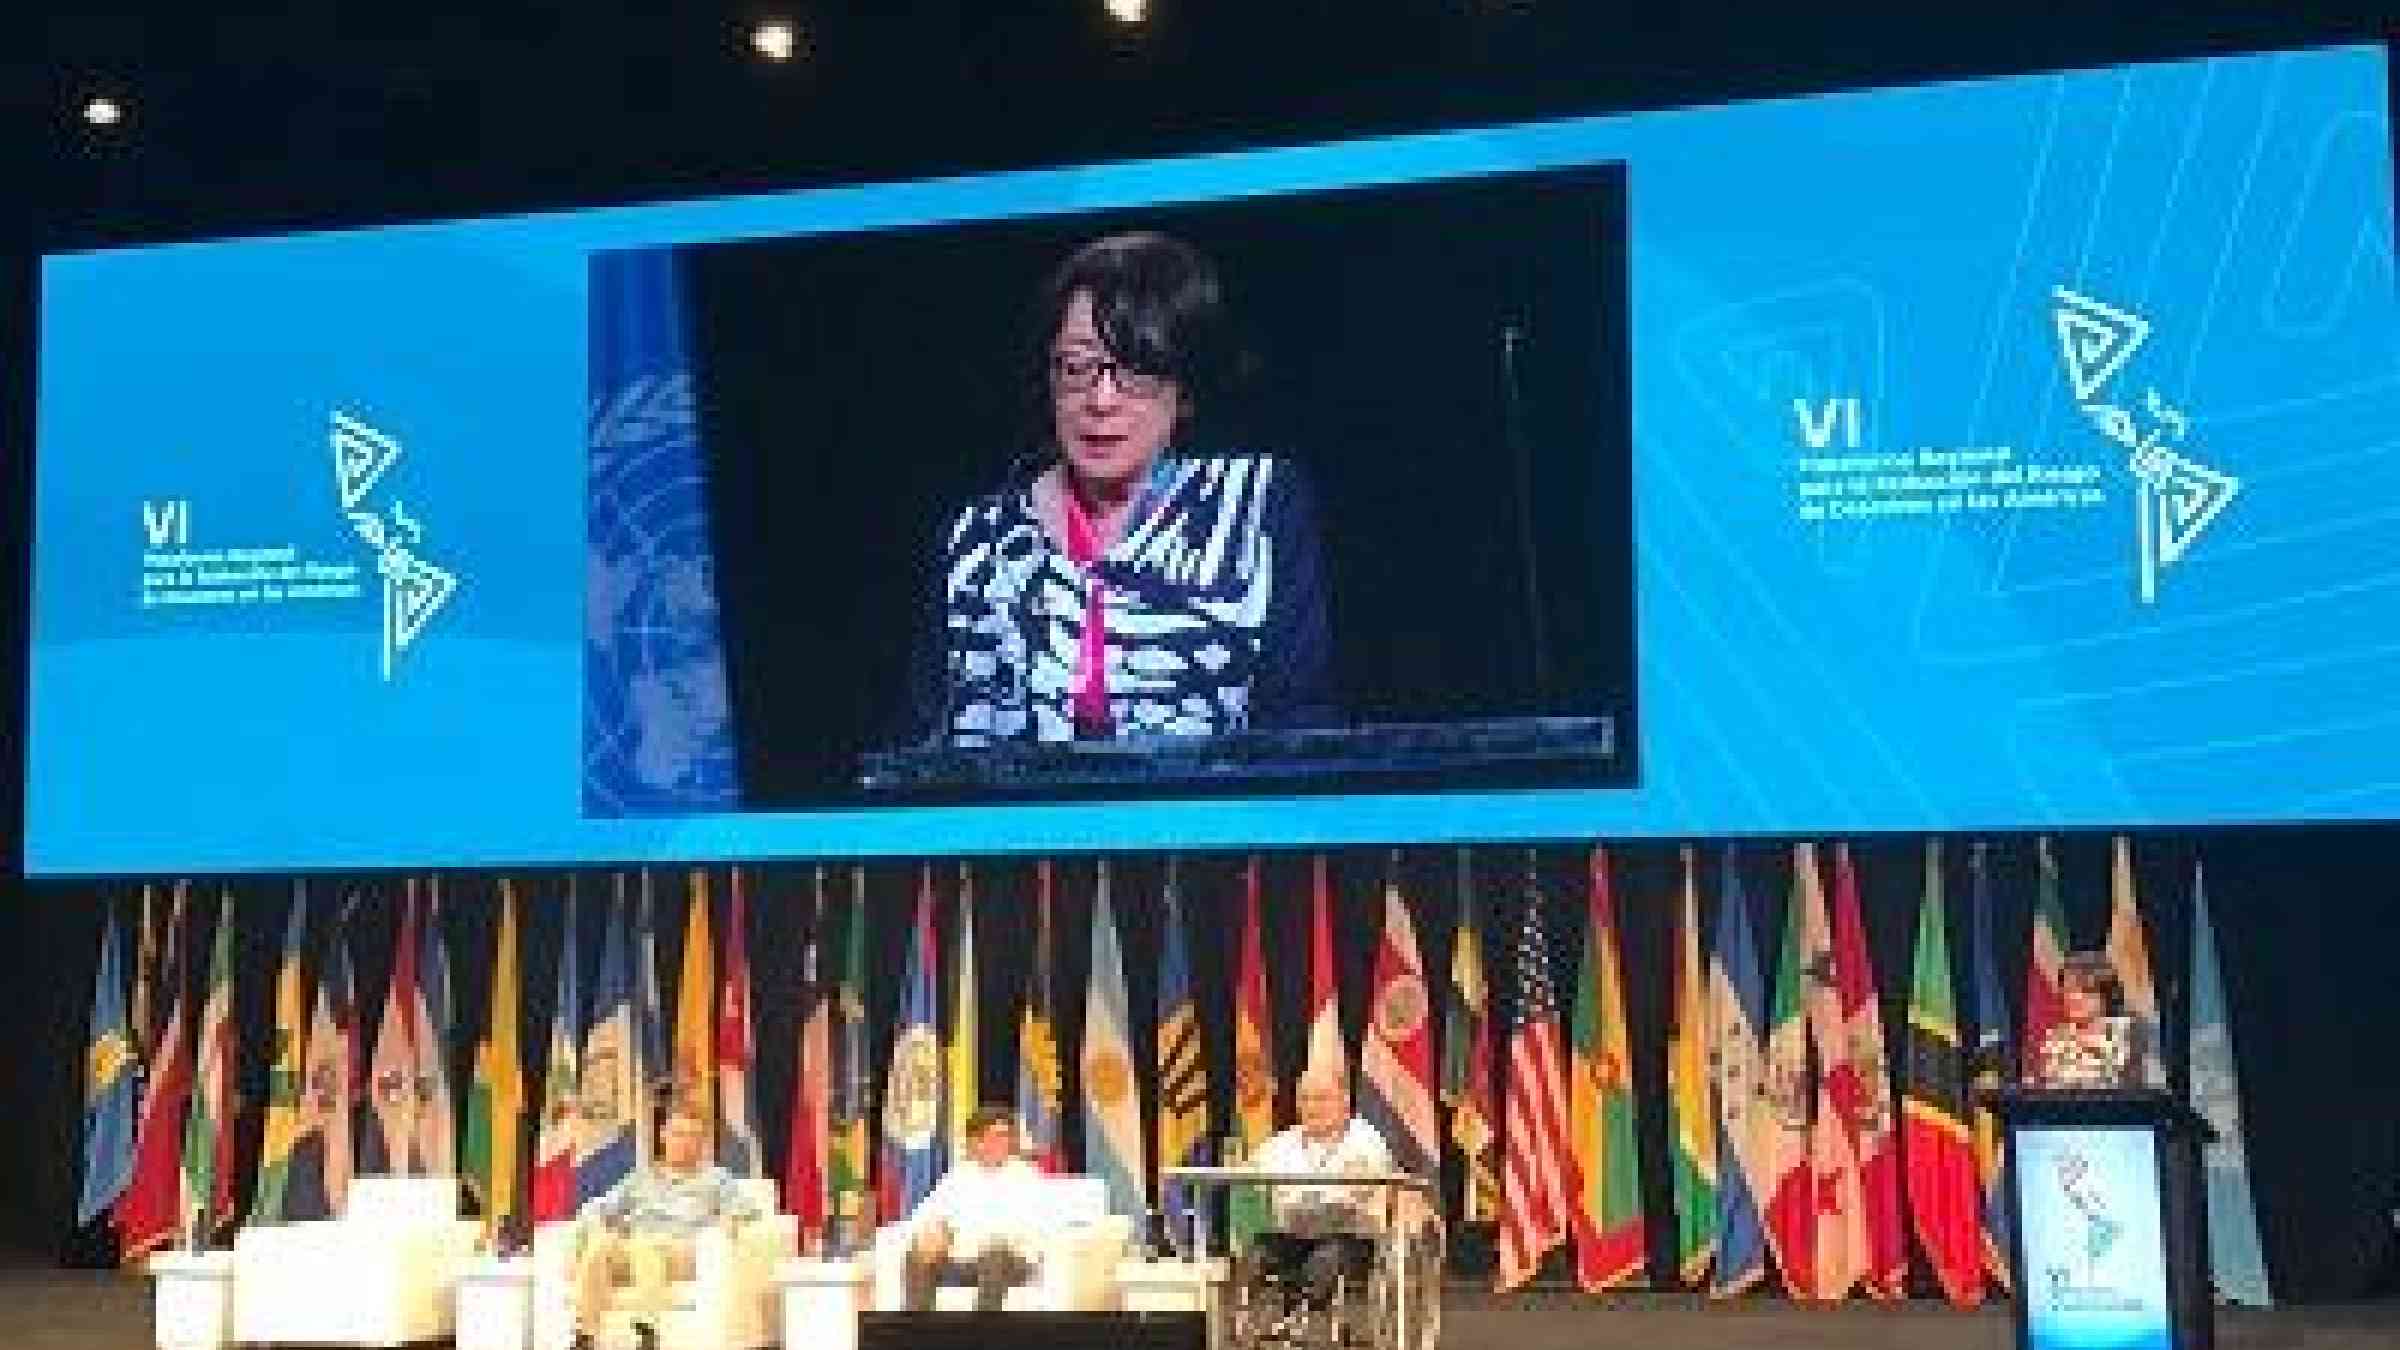 UNISDR head, Mami Mizutori, speaking at the opening of the 6th Regional Platform for Disaster Risk Reduction in the Americas